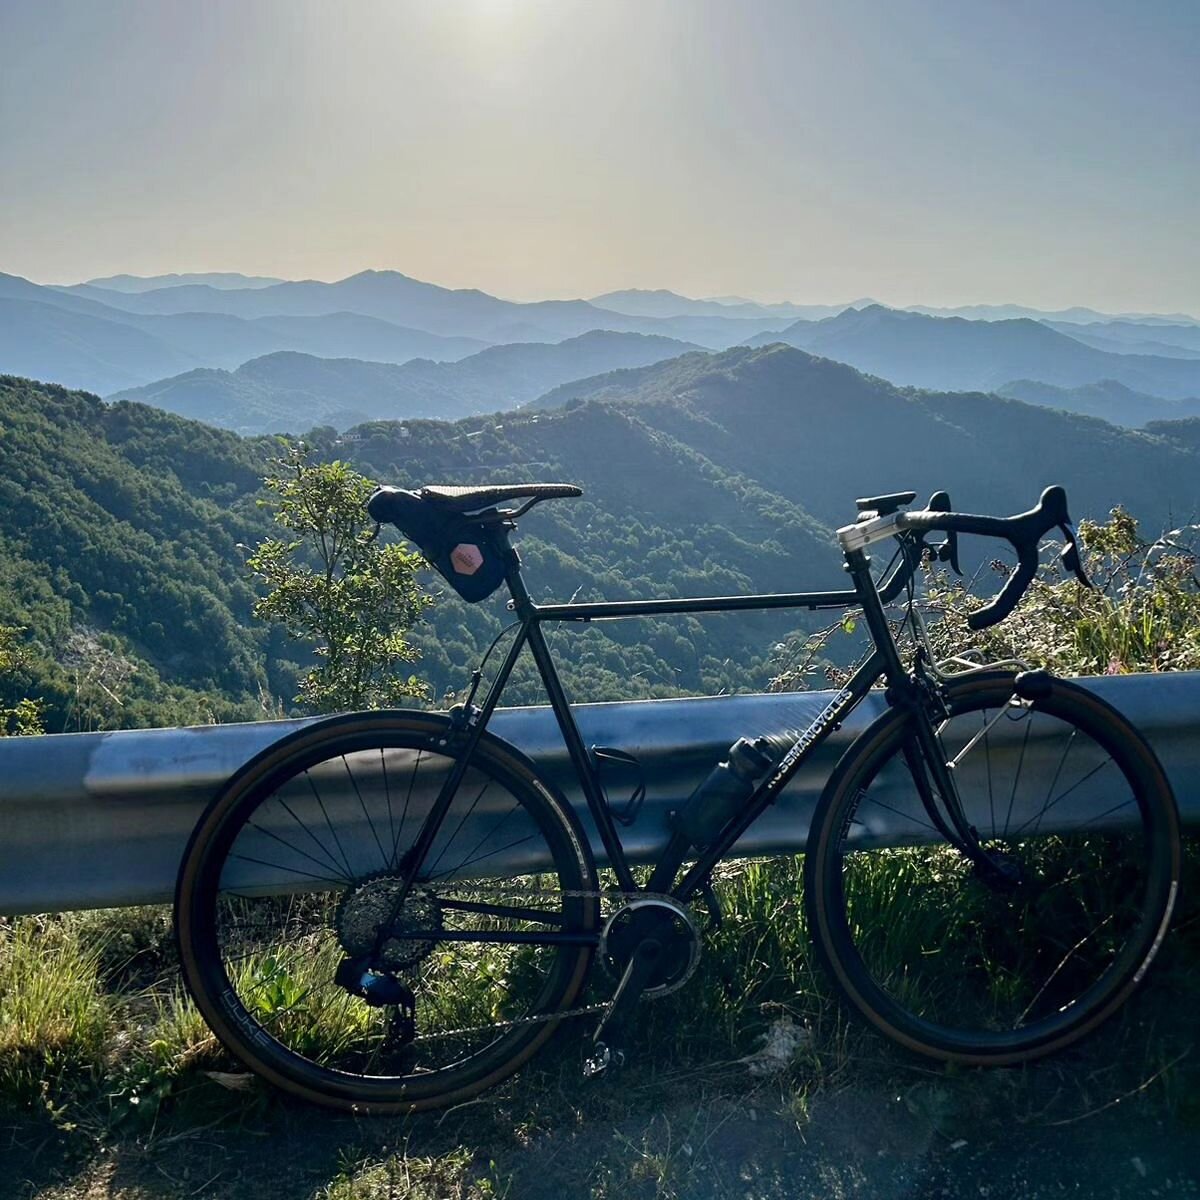 This is the bike I made for this year's #concoursdesmachines2023 #concoursdesmachines
#parisbrestparis2023
It's for my good friend @oli4.king
He sent me this amazing photo of it in Italy in its #alternativeconfigutation ... That is Belgian gravel mod